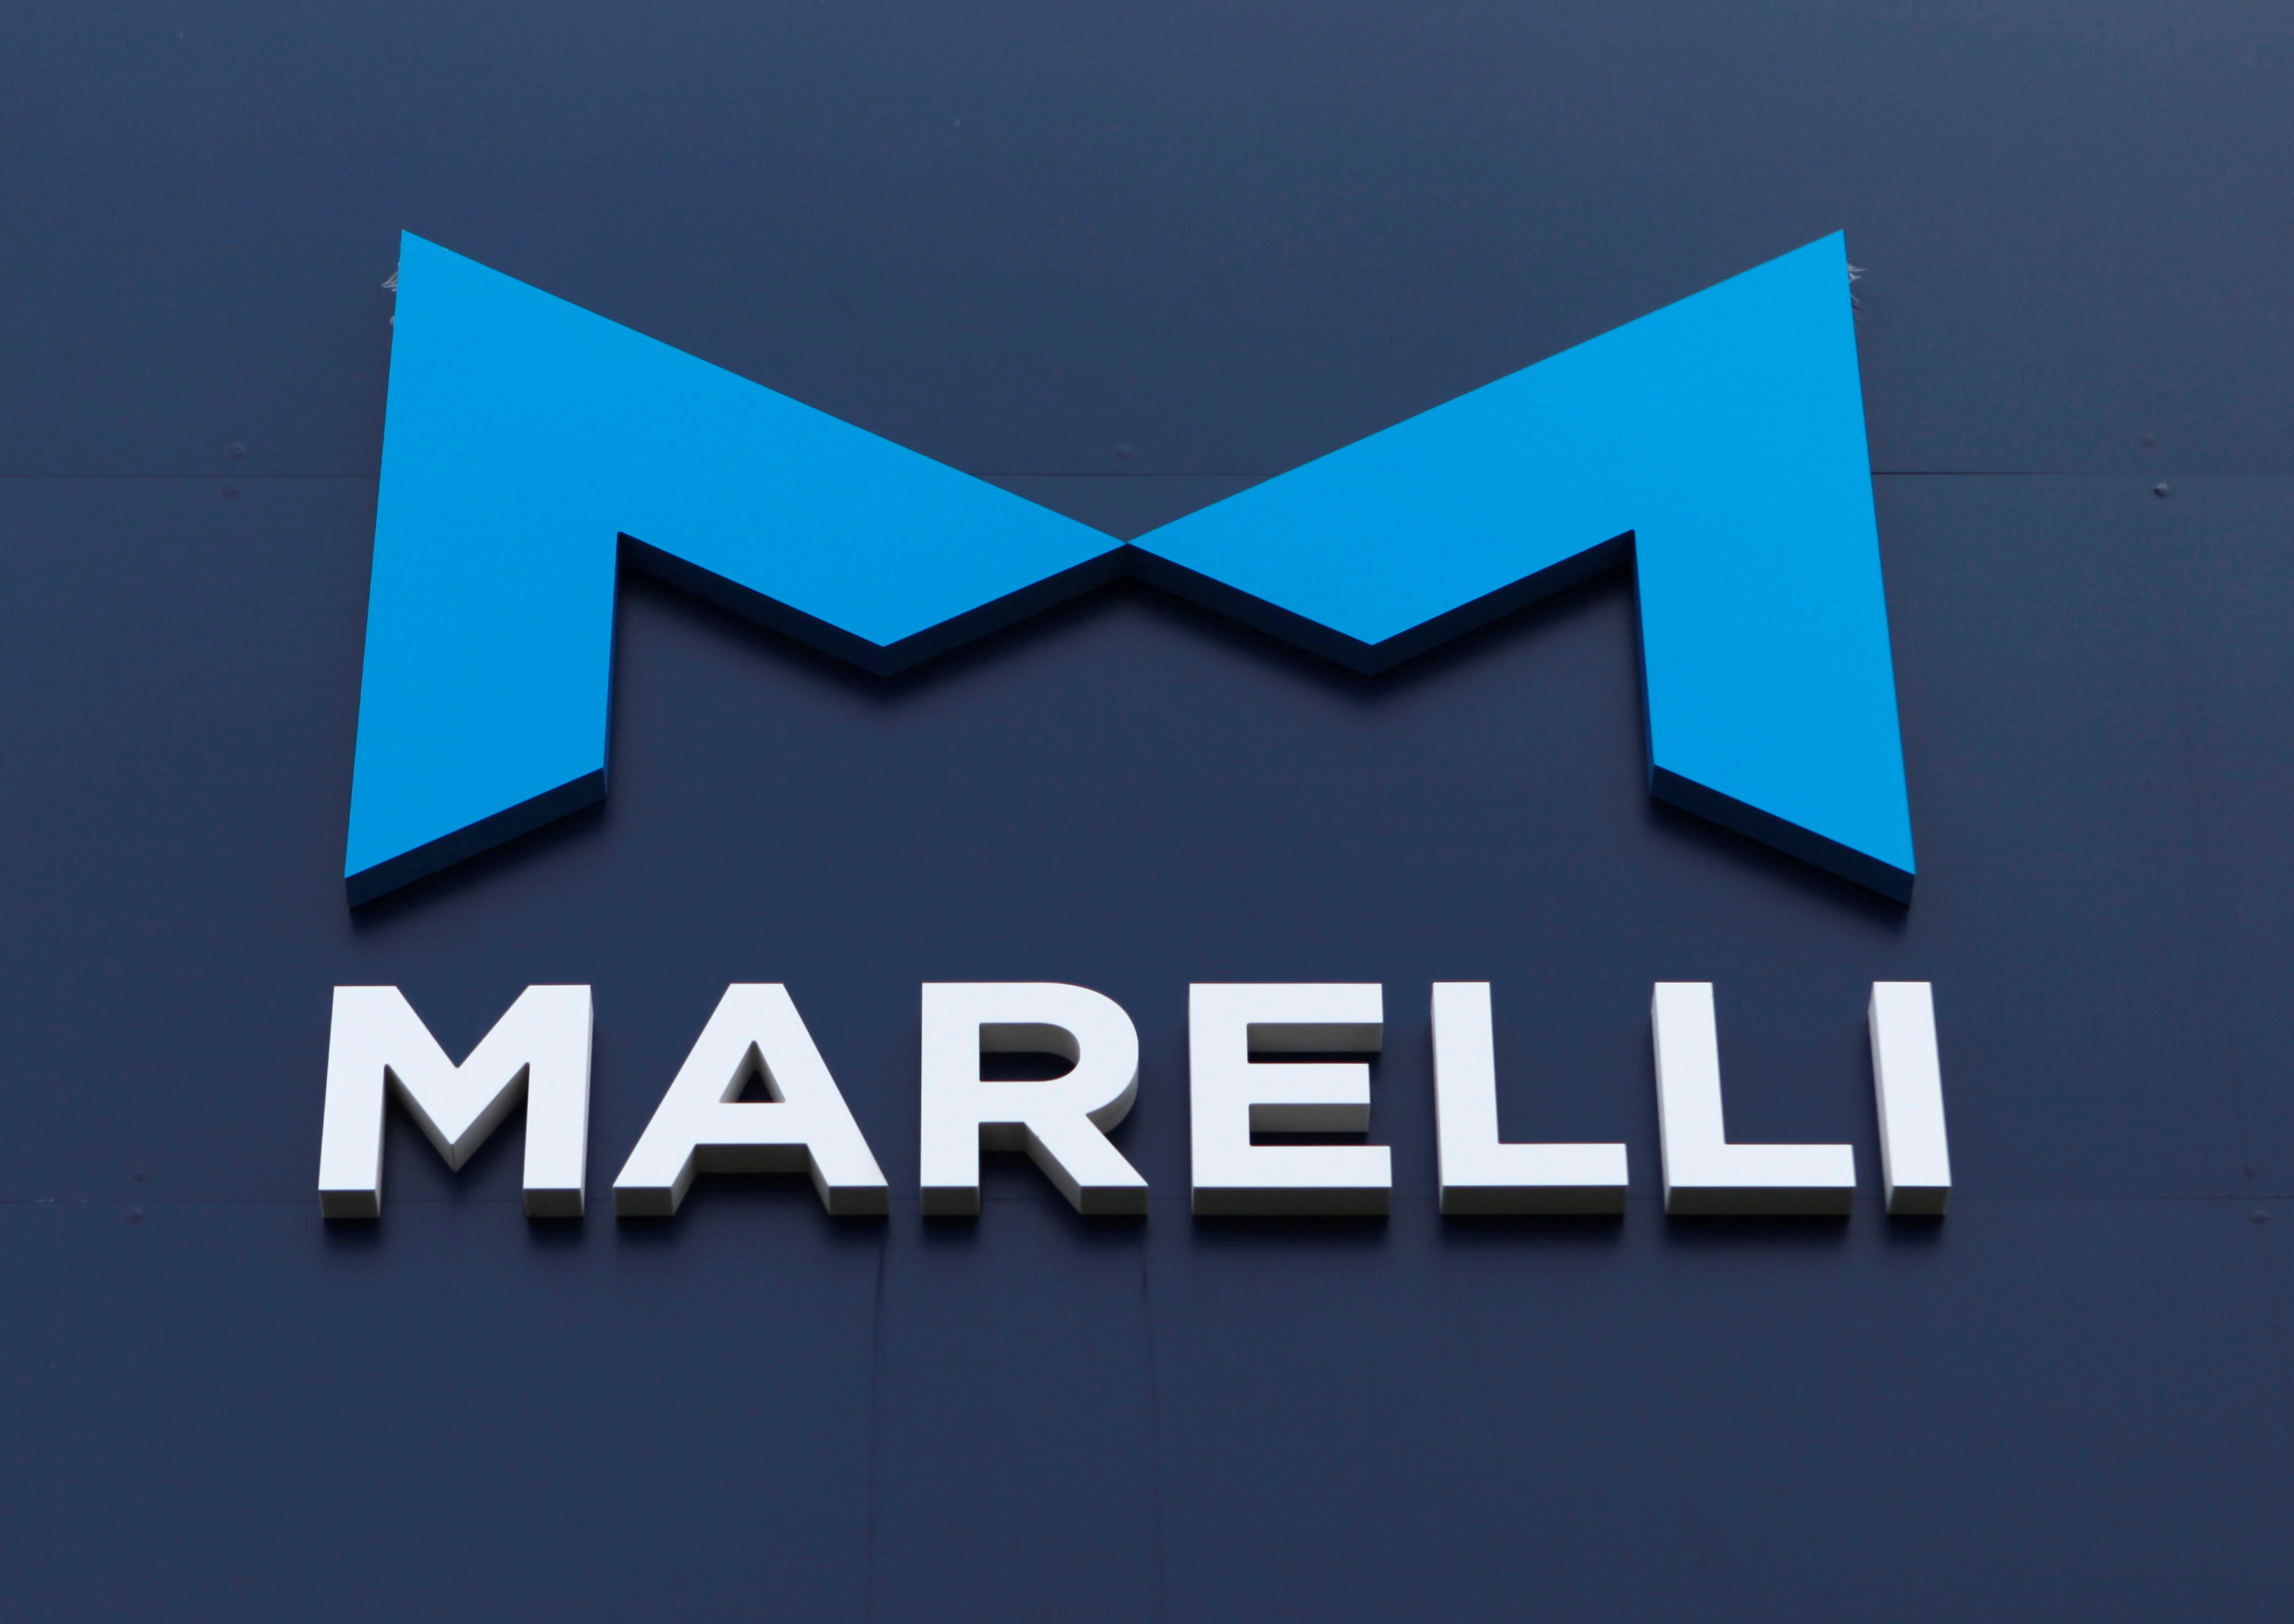 The company logo of Marelli is displayed at the factory in Ora Town, Japan